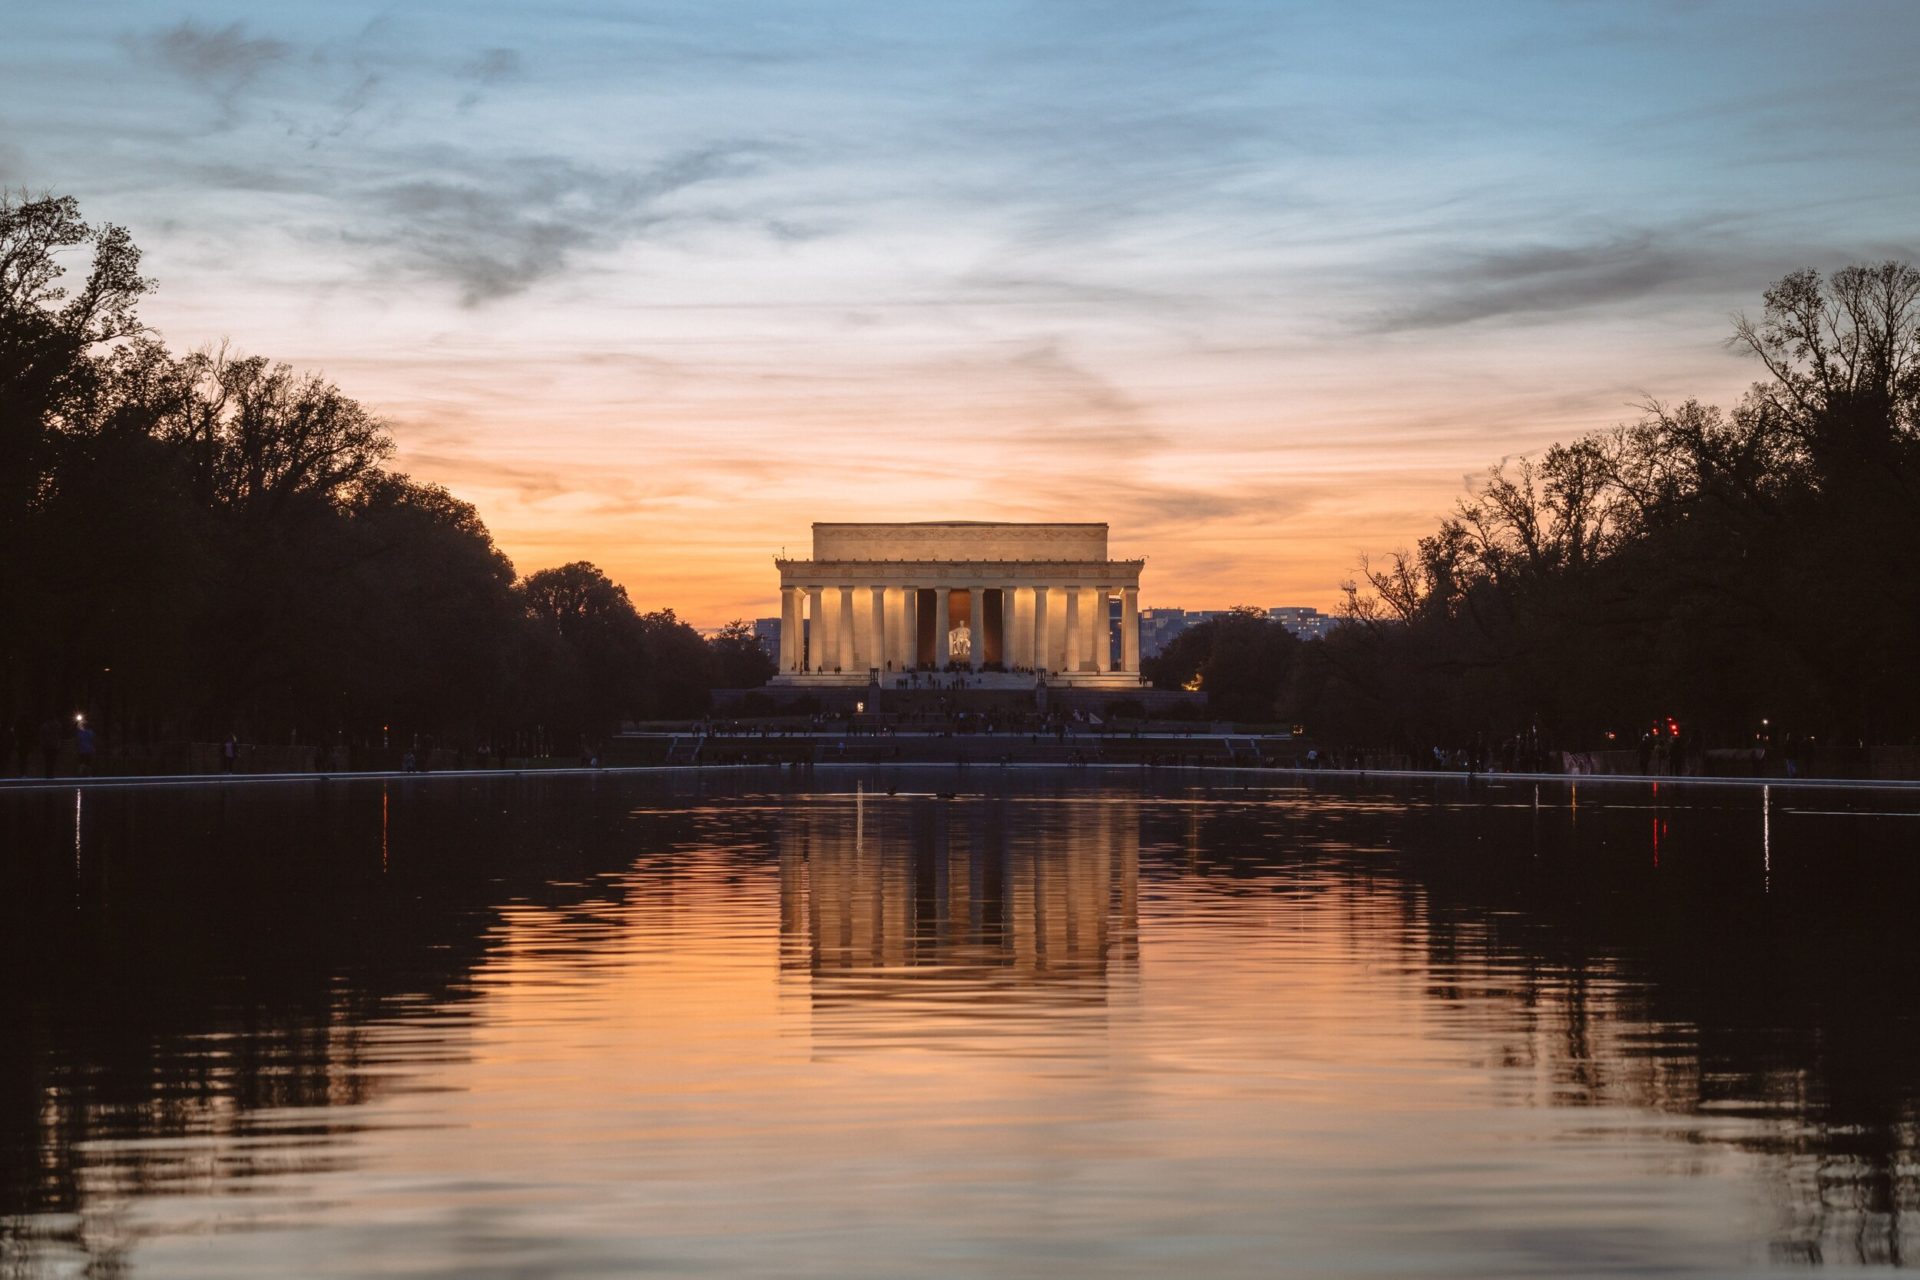 November 17, 2019 - Sunset at Lincoln Memorial in Washington DC on the National Mall. (Photo by Andy Feliciotti | Unsplash)